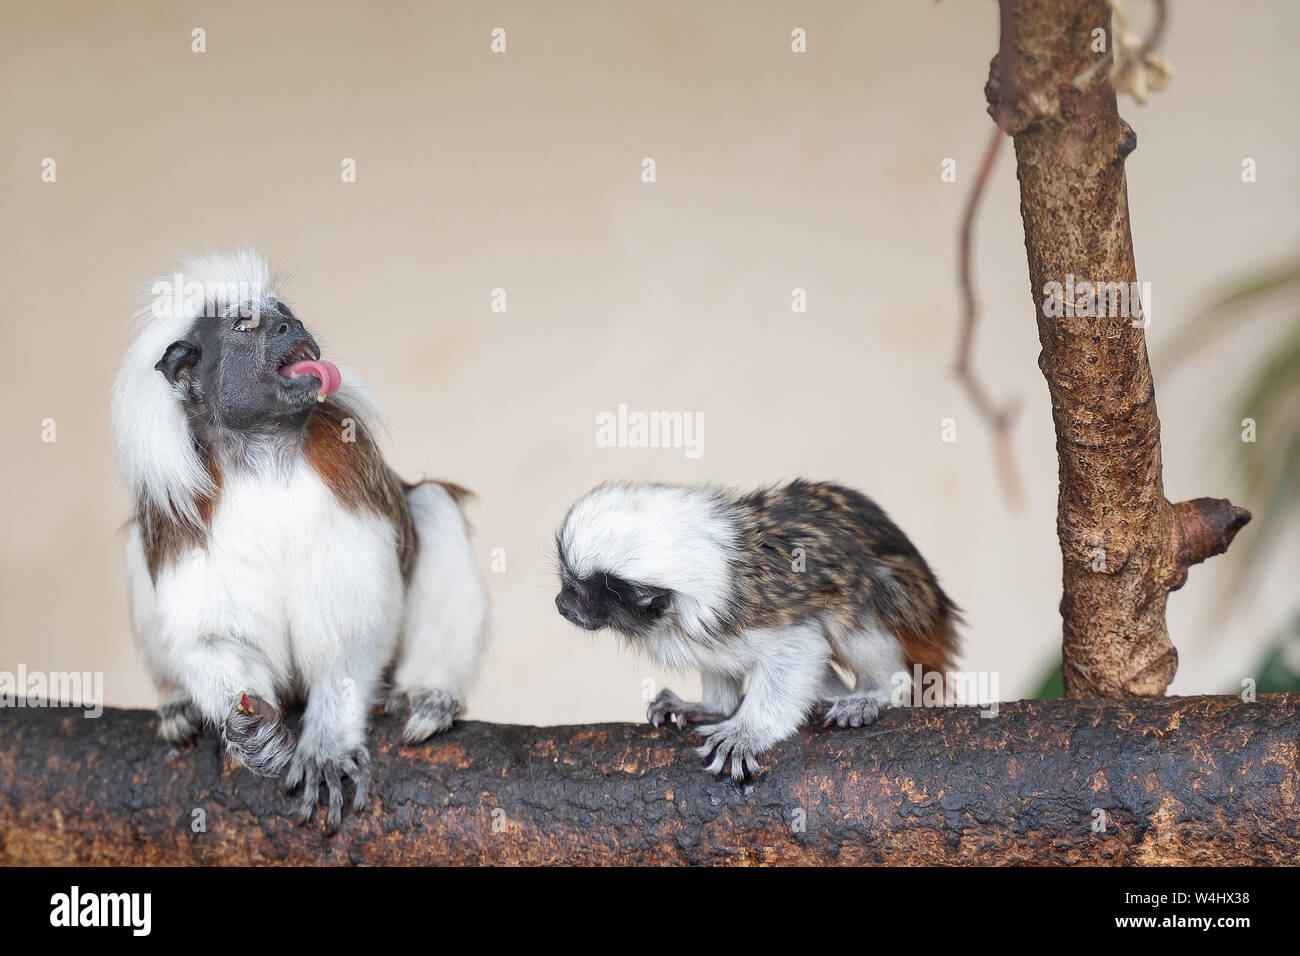 Cotton-top tamarin social interaction with young monkey Stock Photo